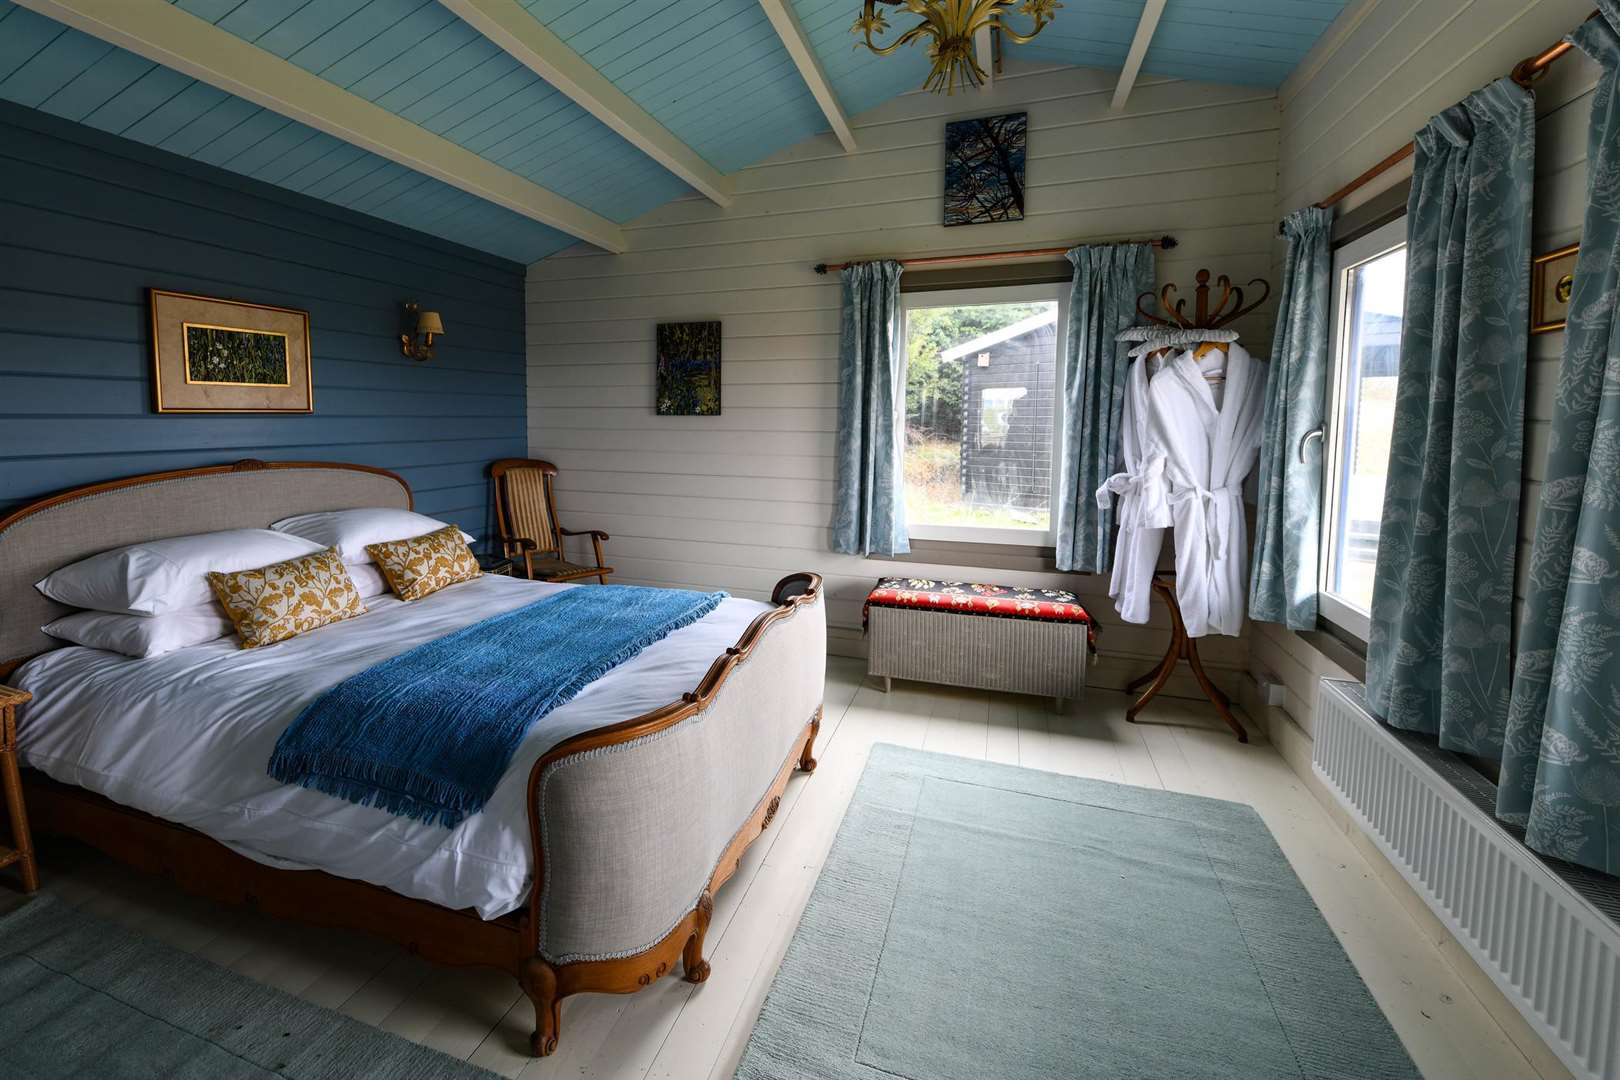 The bedroom in the blue cabin designed by Kimmie McHarrie. Picture: Phil Harris (5020381)